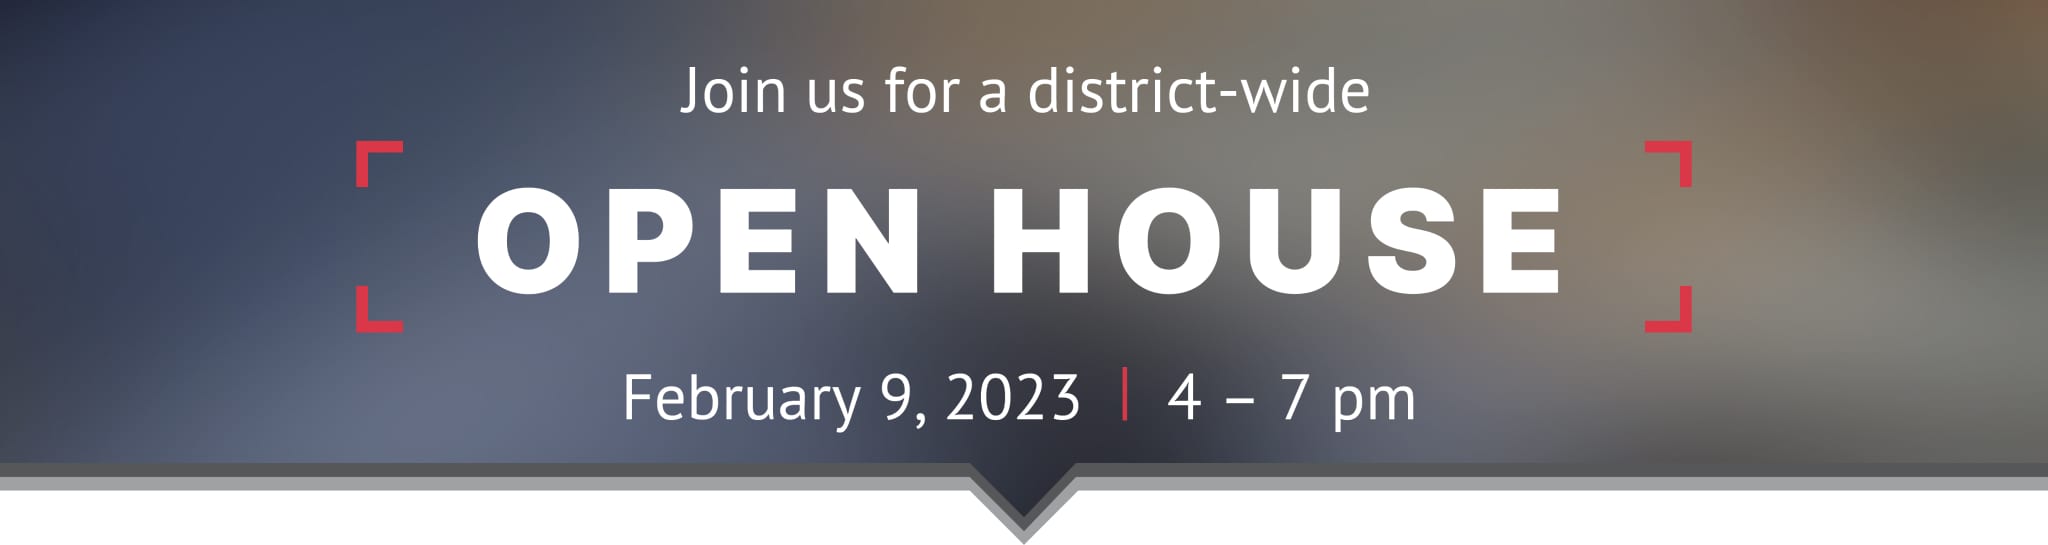 Join us for a district-wide Open House January 24, 2023; 4-7 pm